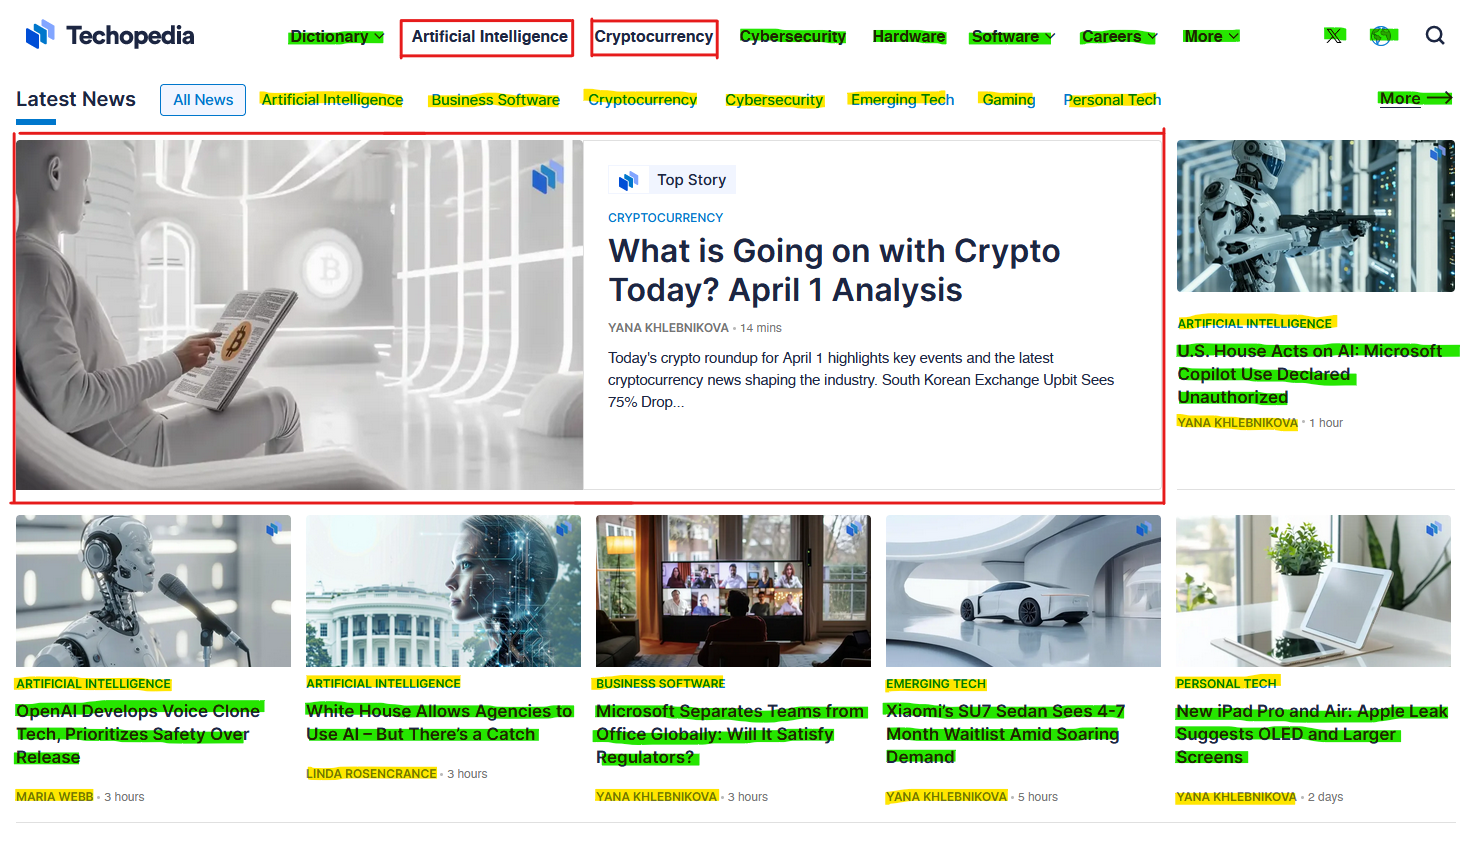 Screenshot of a technology news website's homepage with headlines about cryptocurrency, AI developments, and emerging tech with highlights  showing candidates for preload